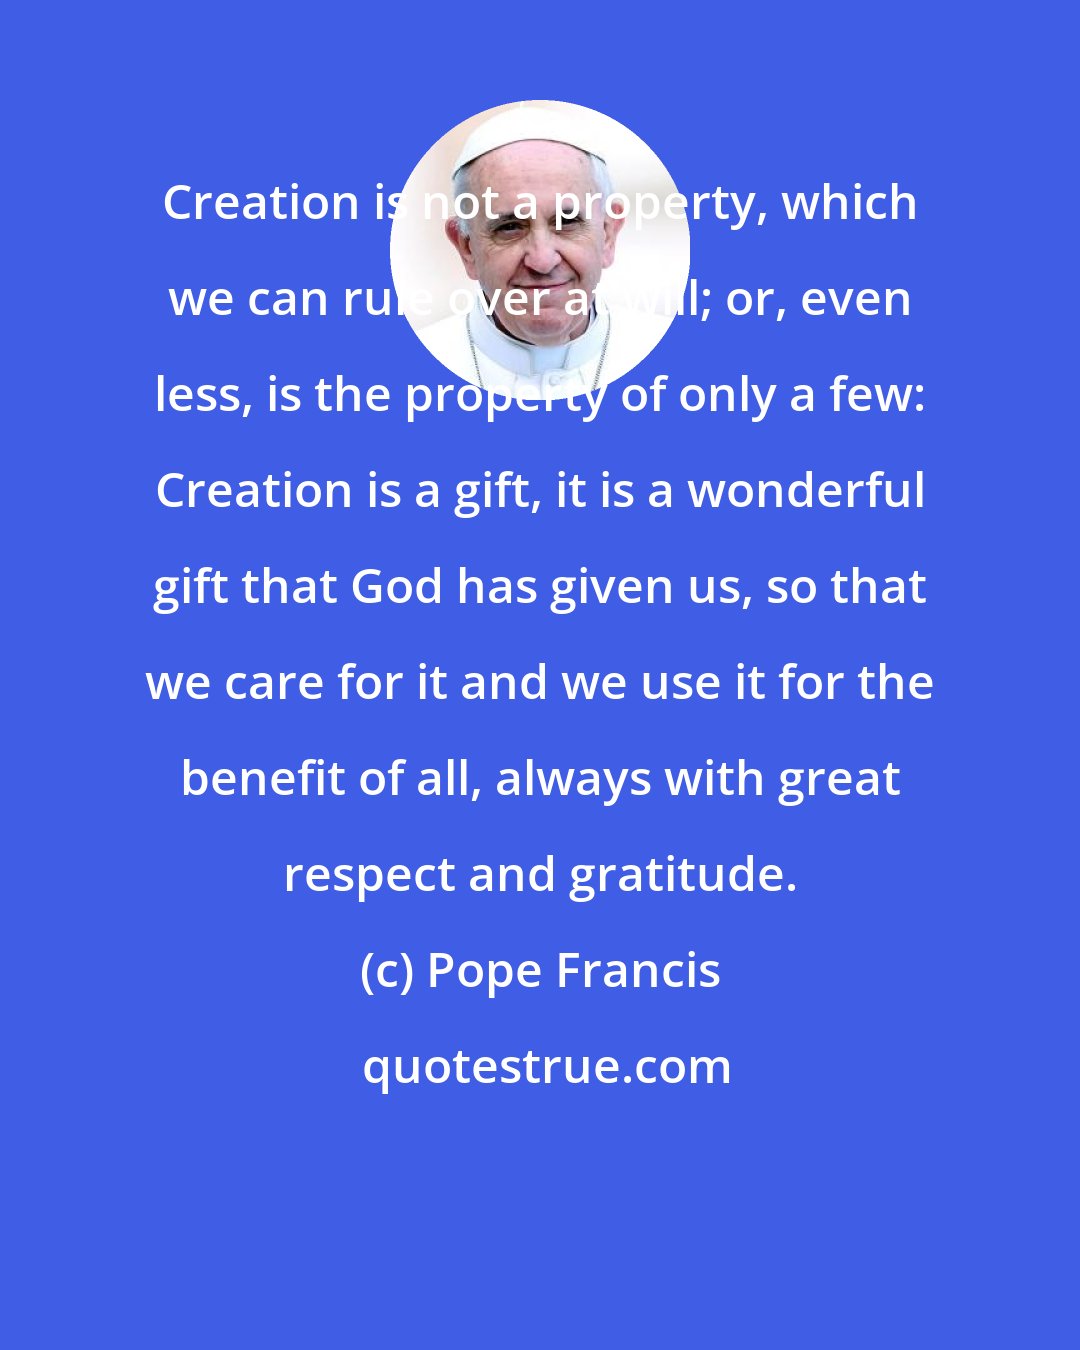 Pope Francis: Creation is not a property, which we can rule over at will; or, even less, is the property of only a few: Creation is a gift, it is a wonderful gift that God has given us, so that we care for it and we use it for the benefit of all, always with great respect and gratitude.